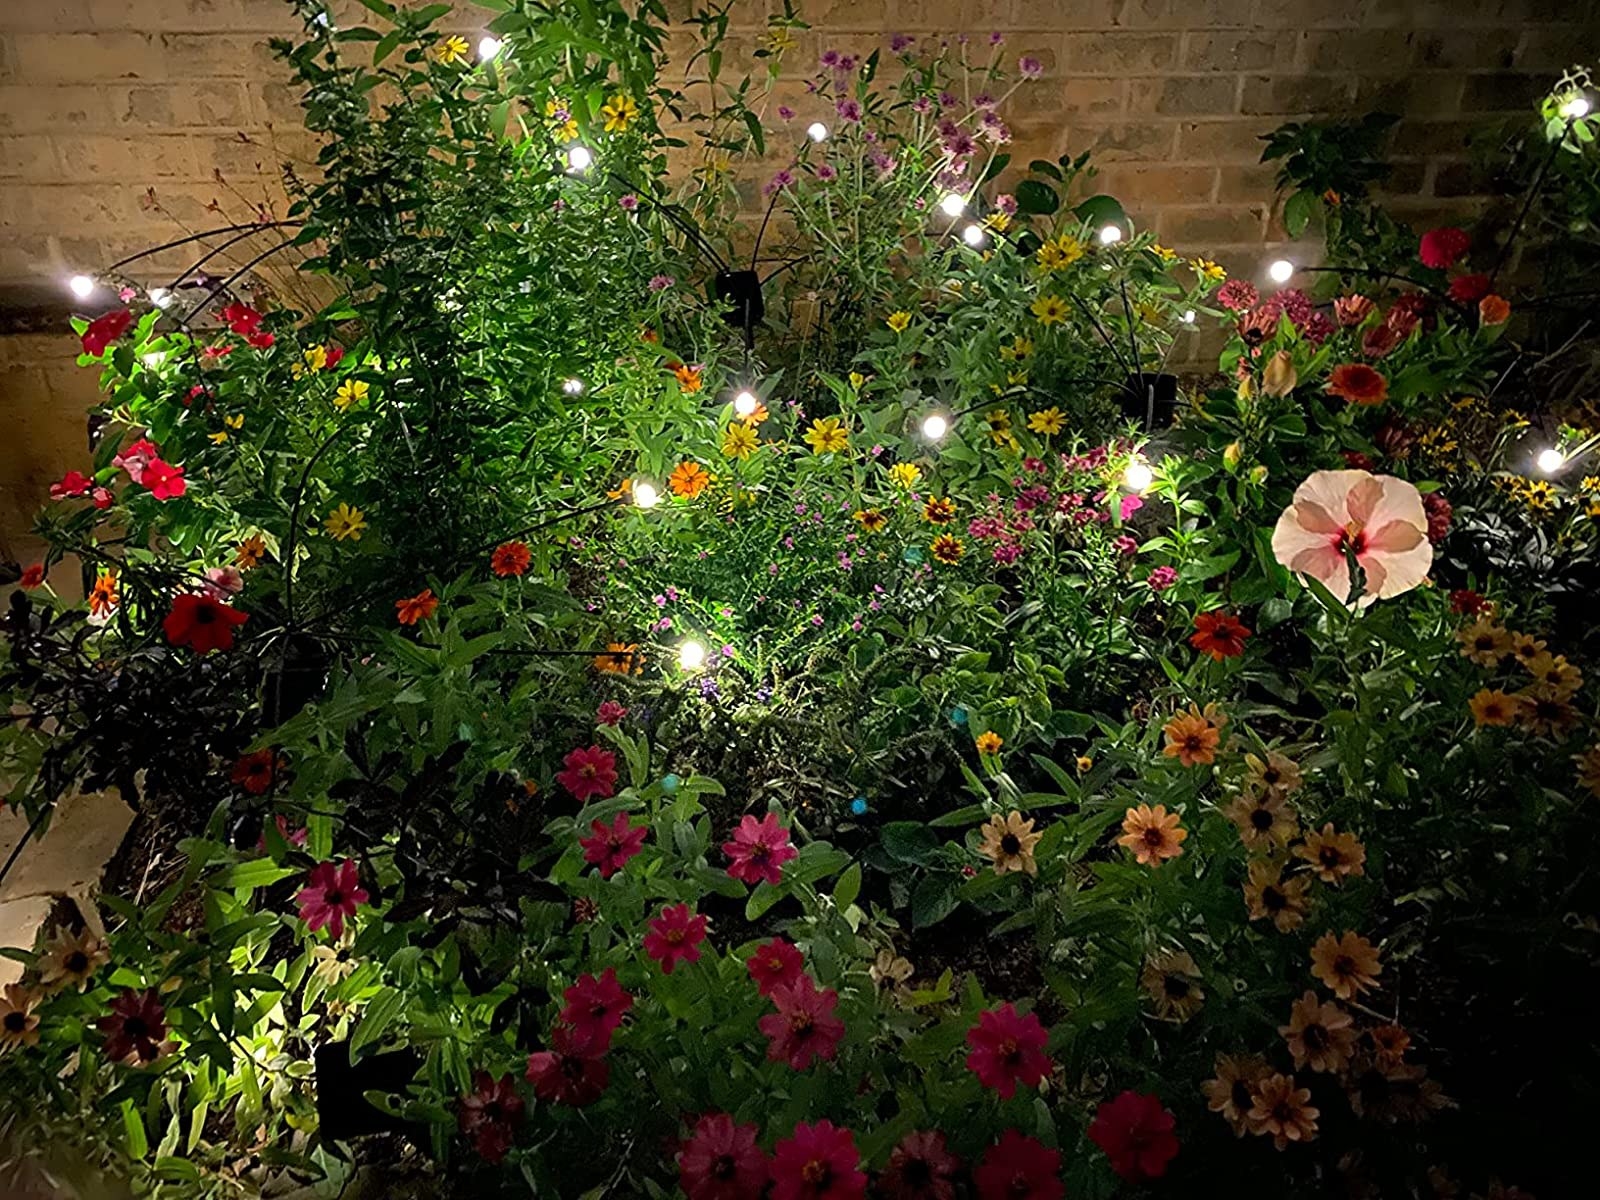 Reviewer photo of the lights in a garden